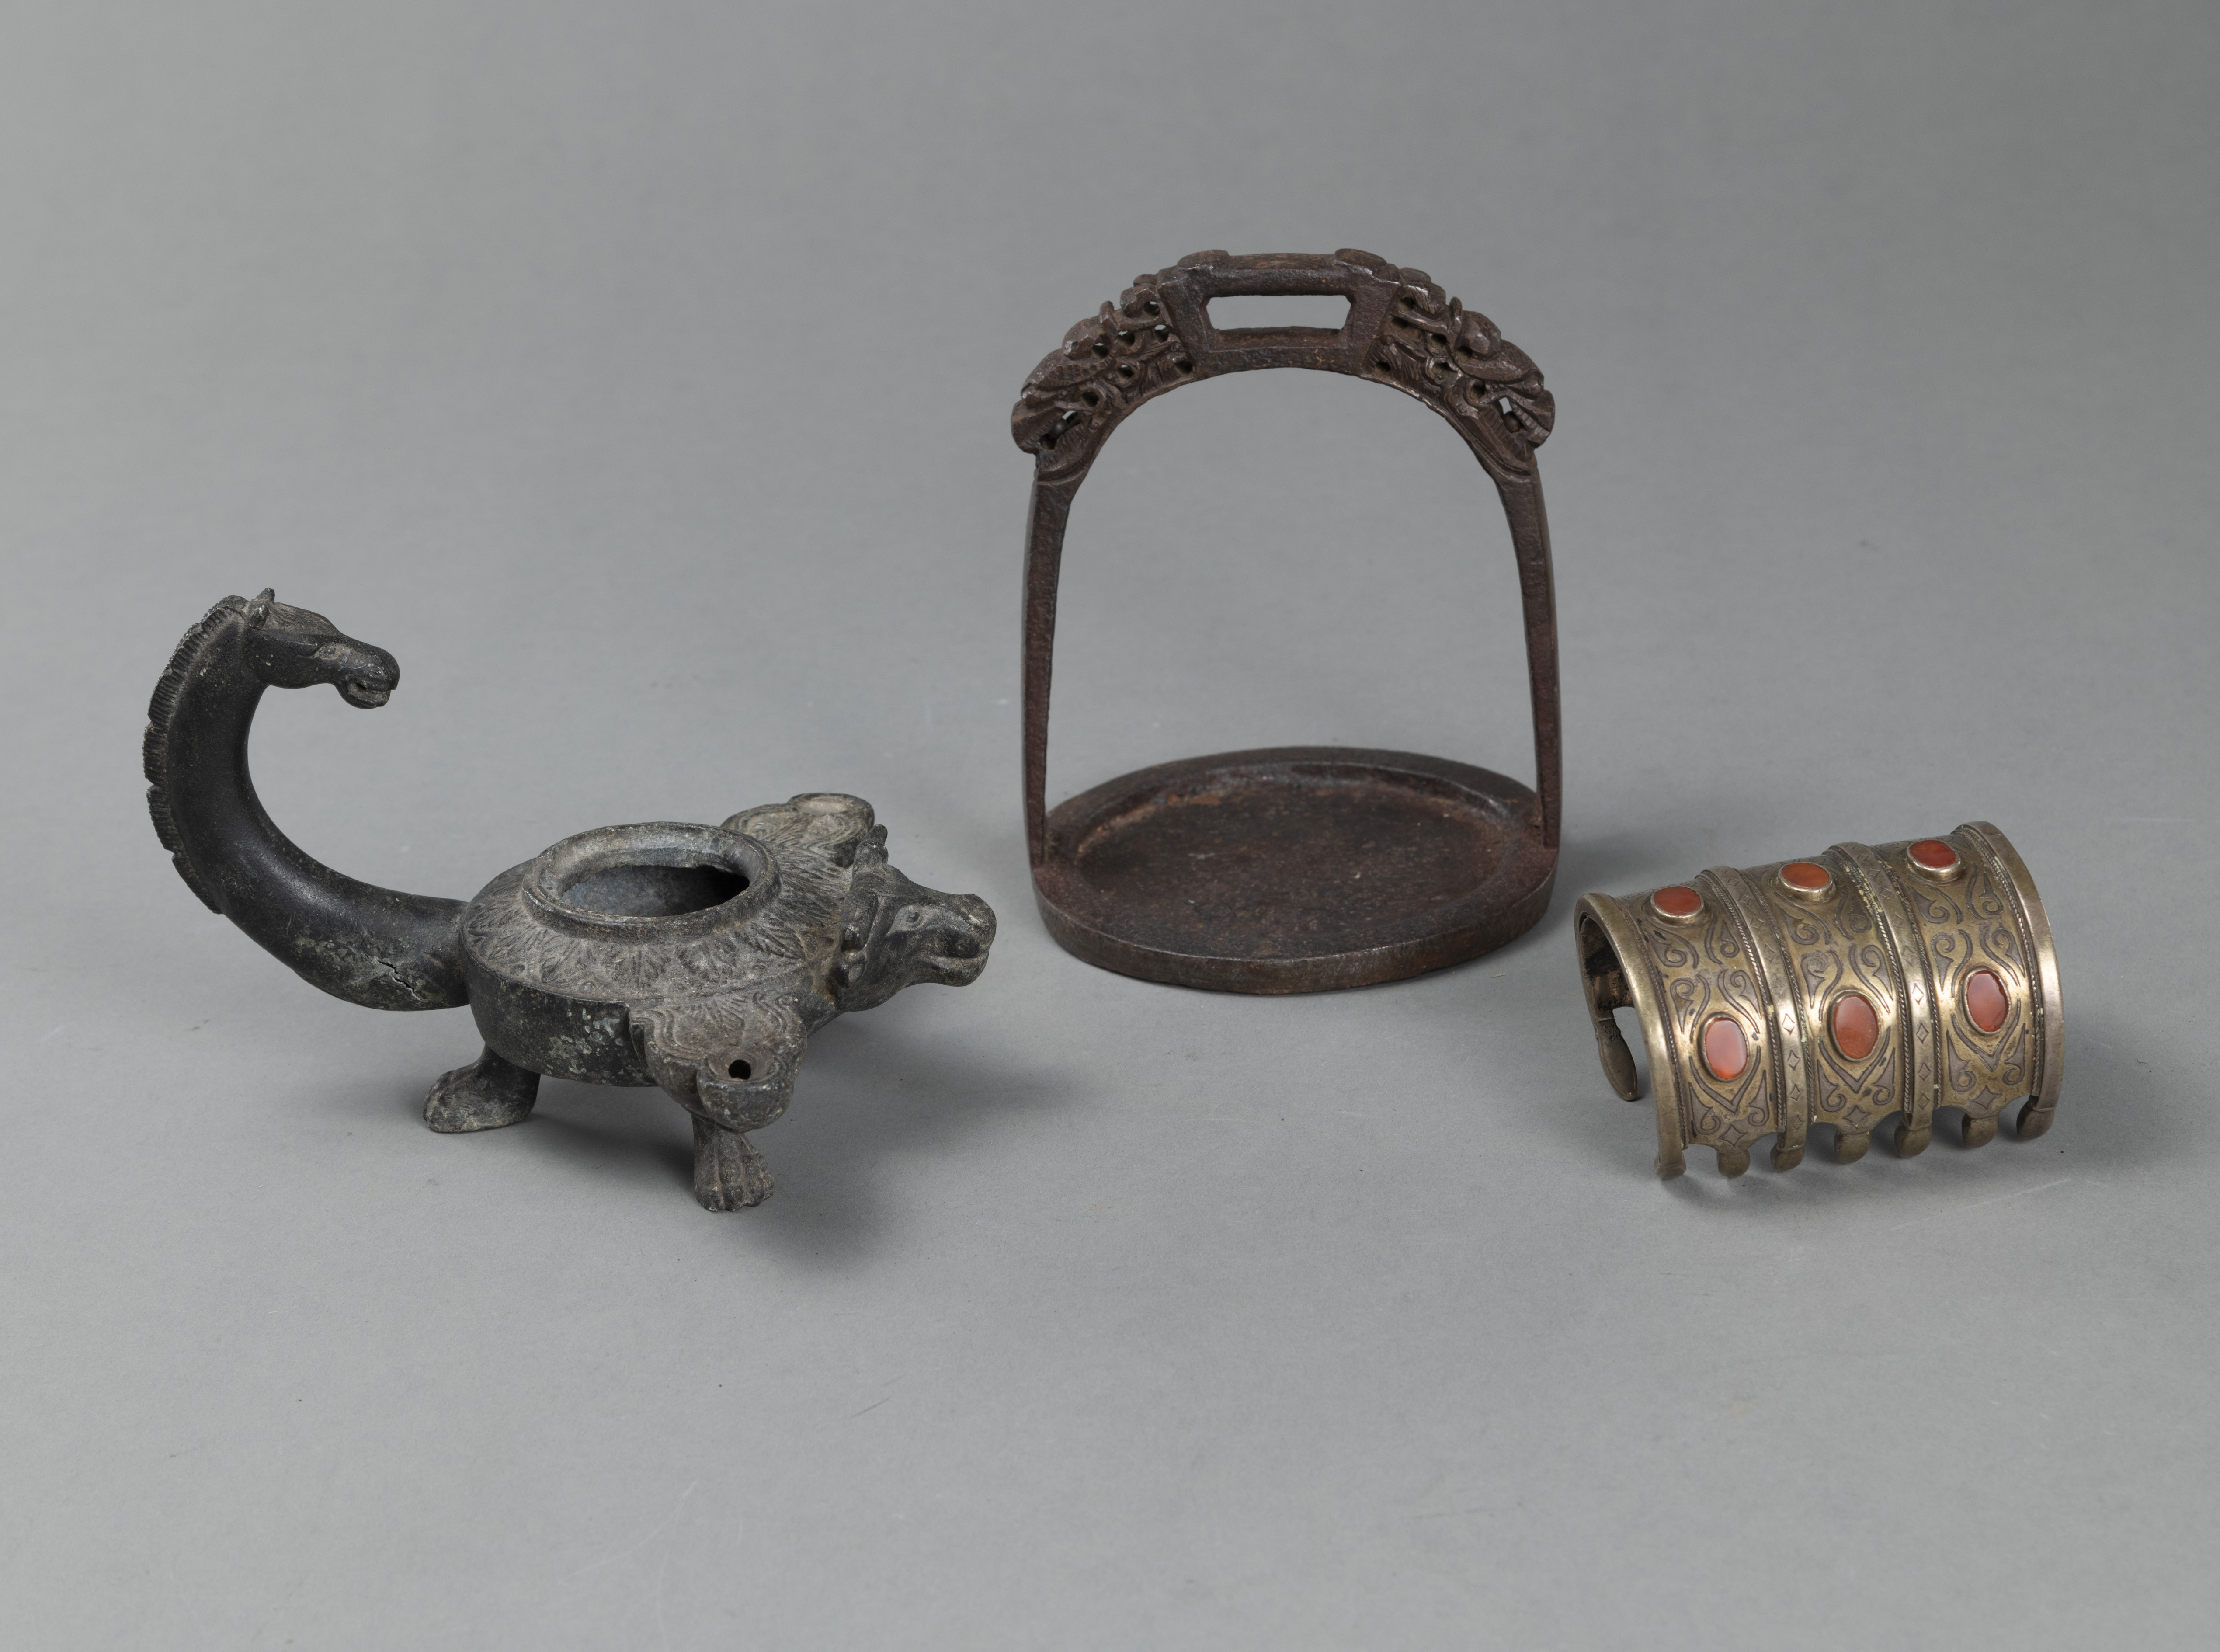 AN IRON STIRRUP, A BRACELET WITH CARNELIAN STONES AND A BRONZE OIL LAMP - Image 2 of 3